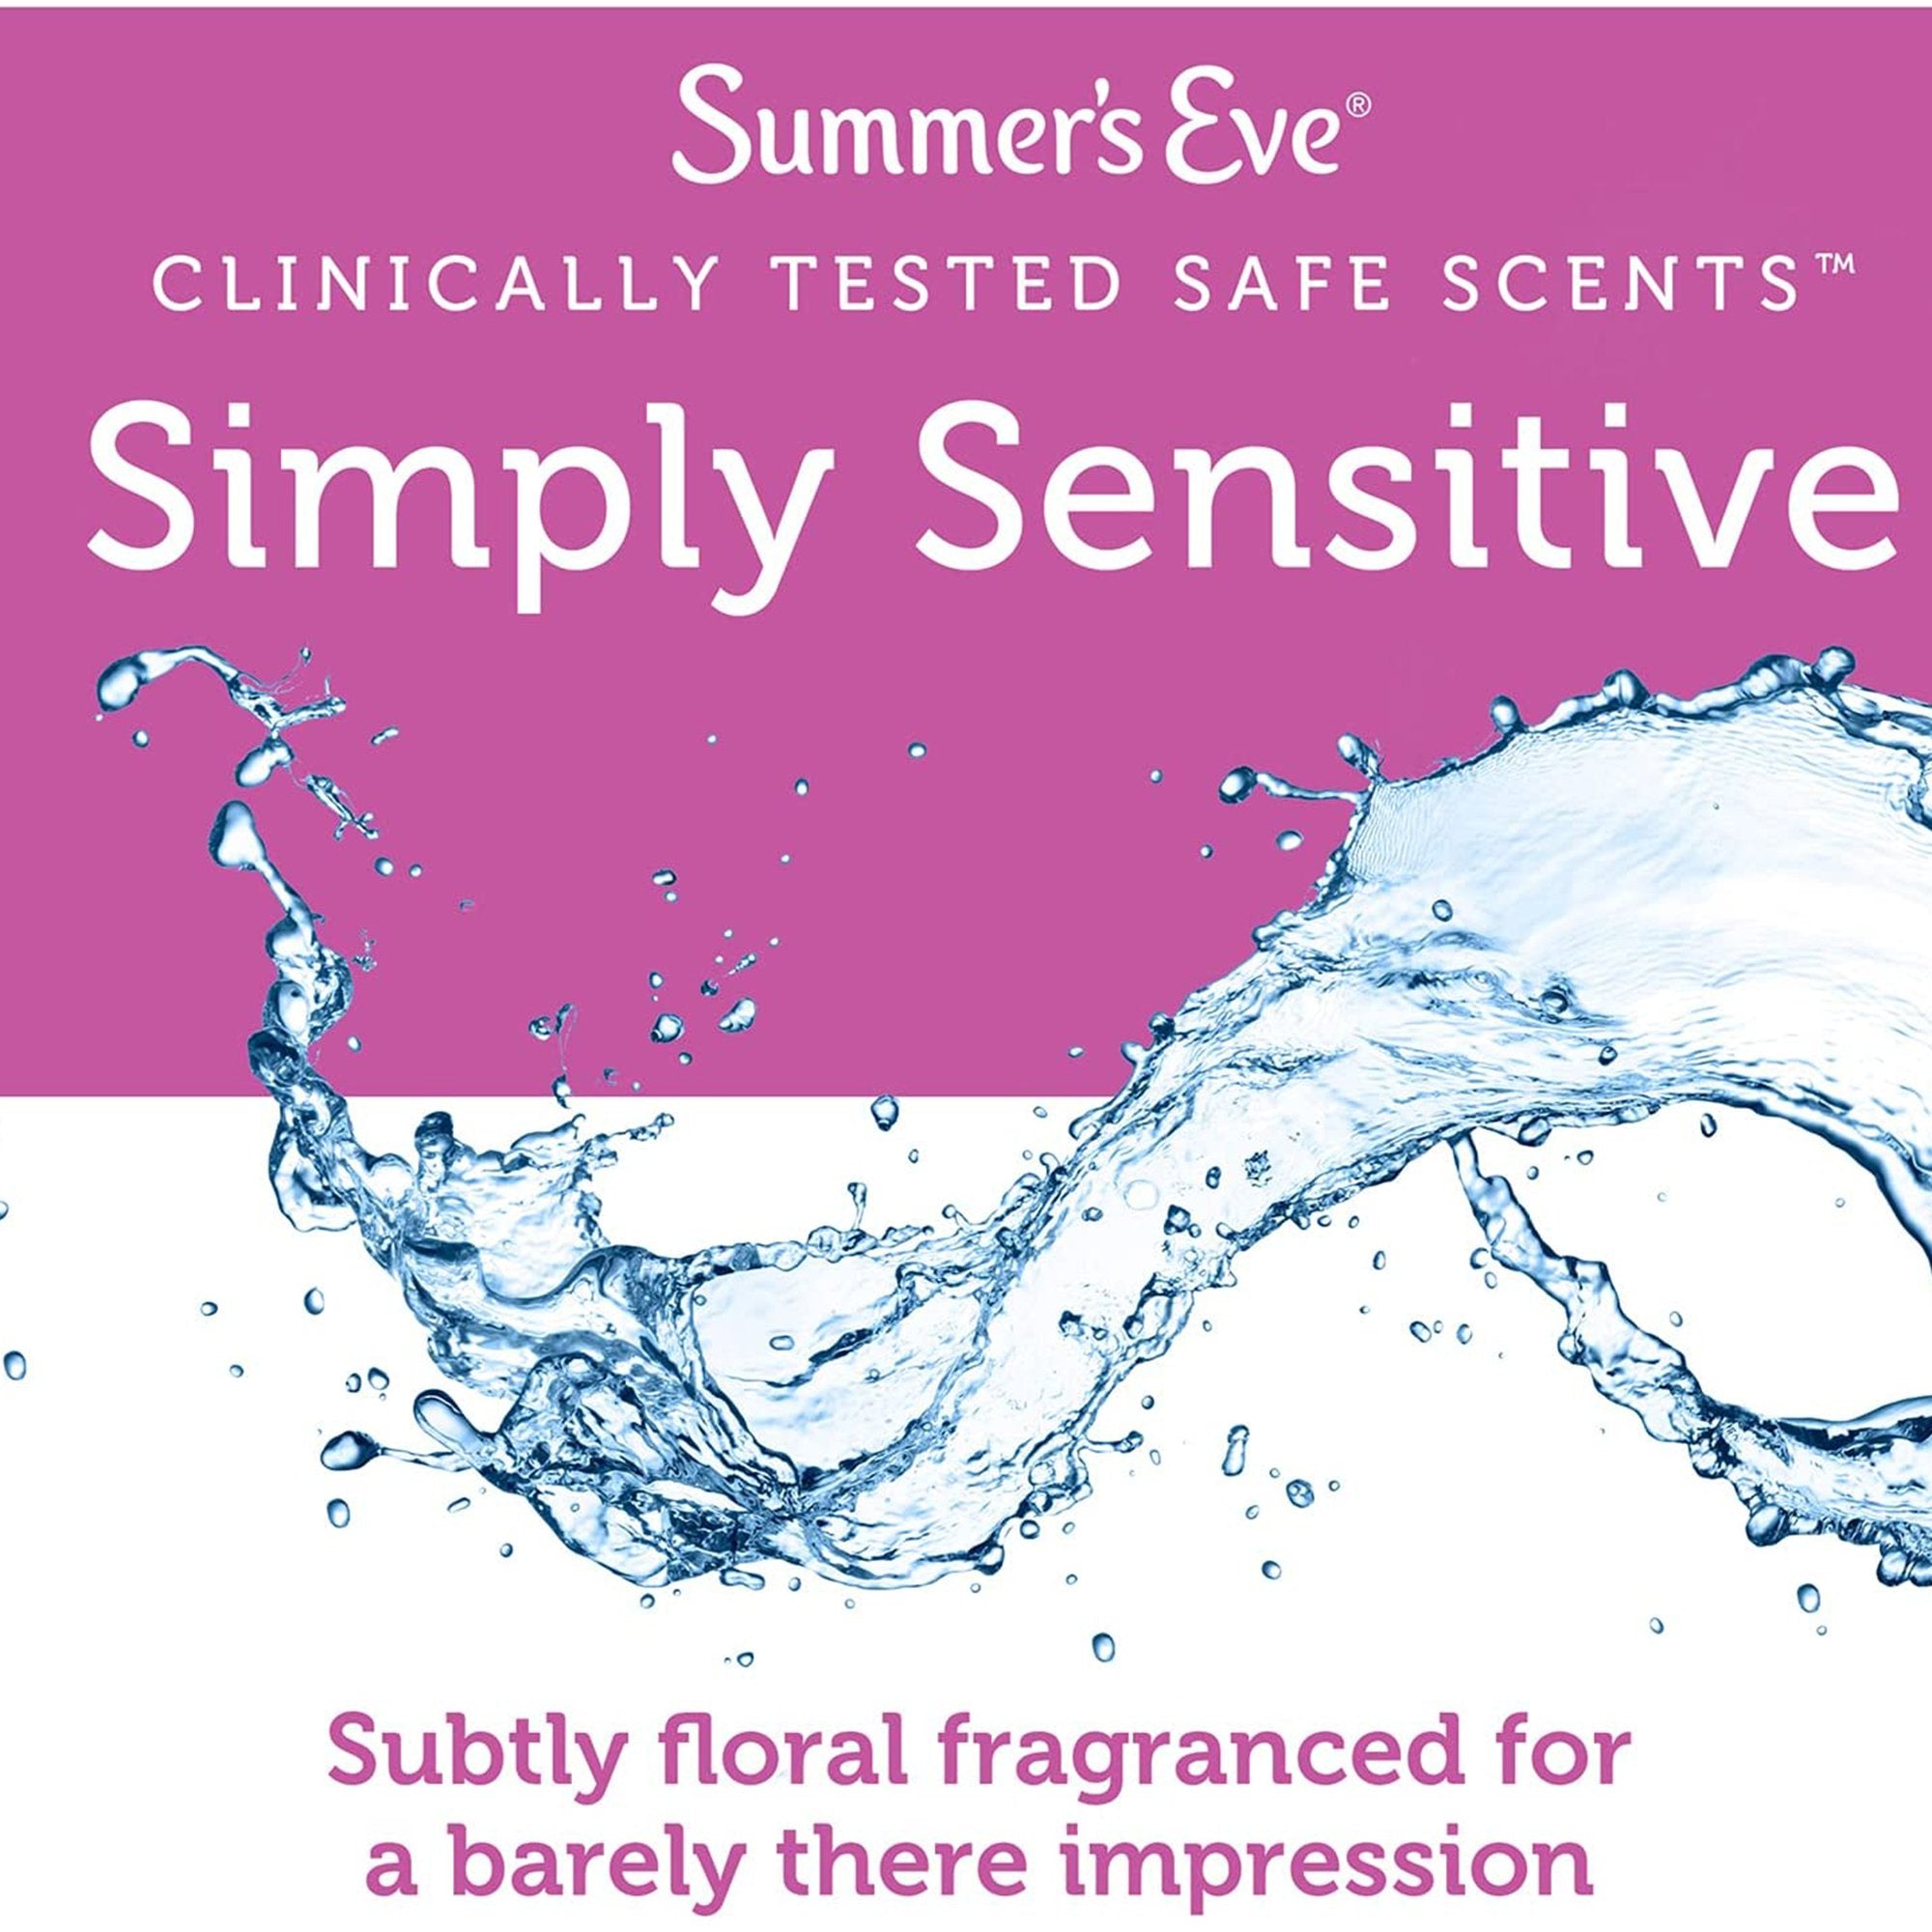 Feminine Hygiene Towelette Summer's Eve® Simply Sensitive Individual Packet Scented 16 Count